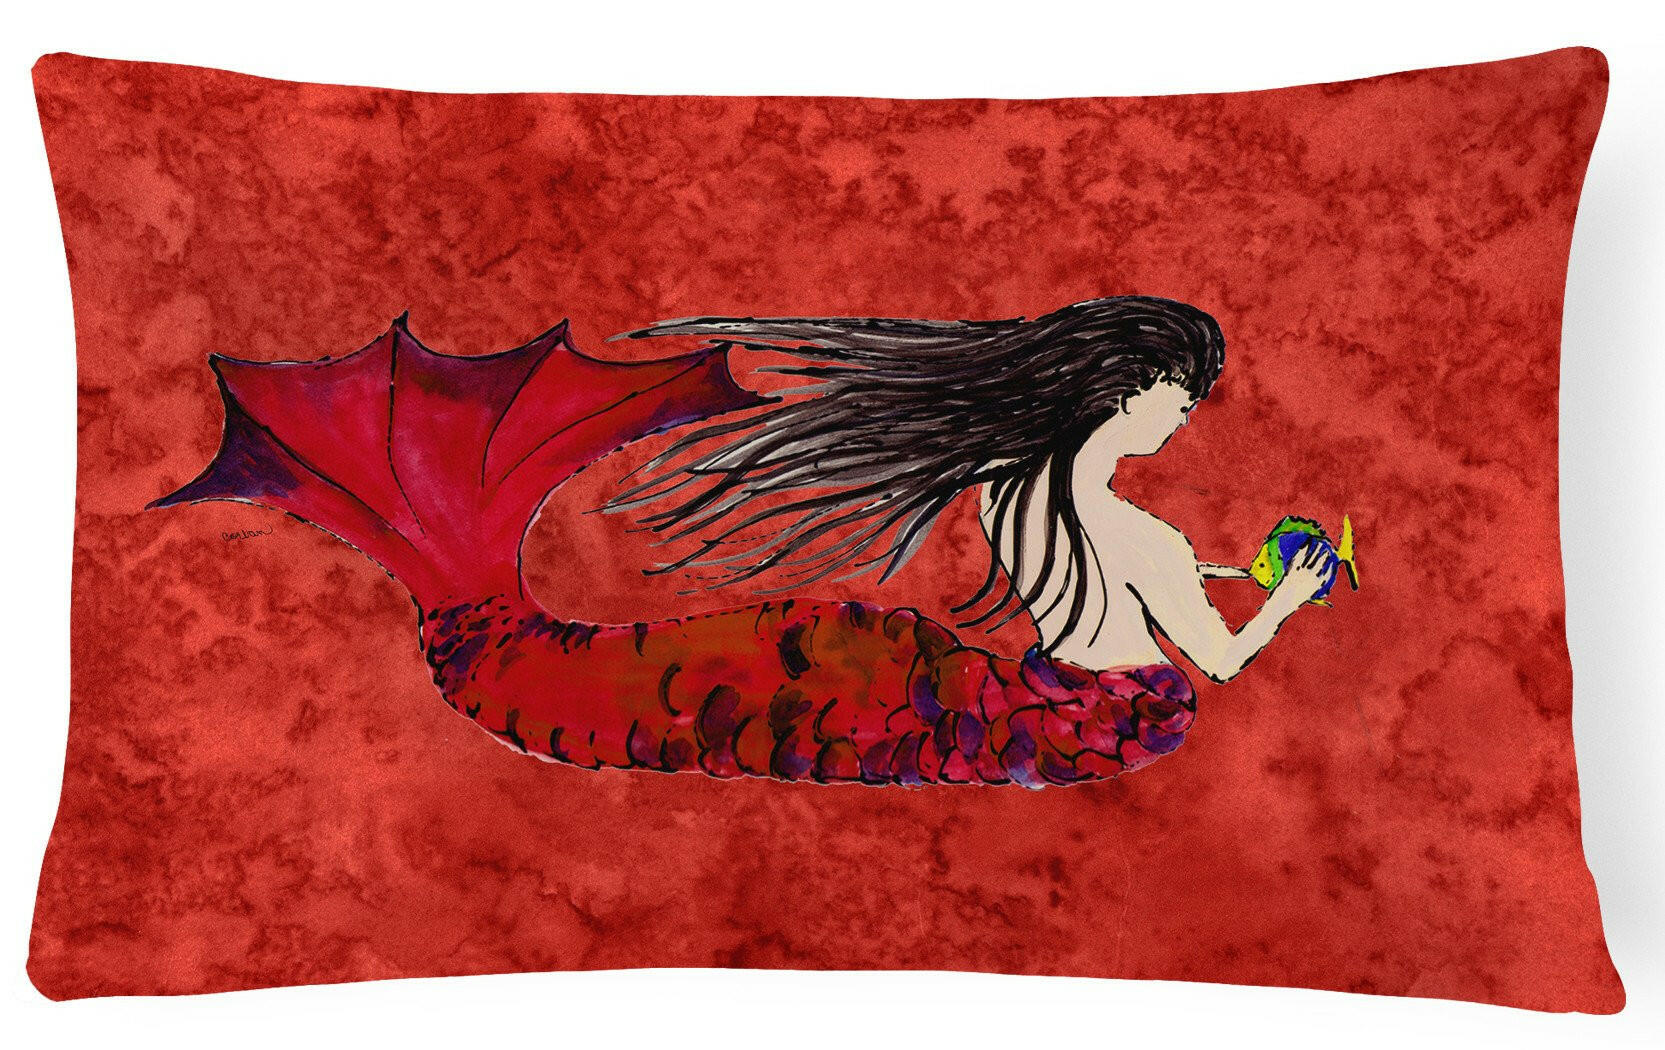 Black Haired Mermaid on Red Canvas Fabric Decorative Pillow 8726PW1216 by Caroline's Treasures